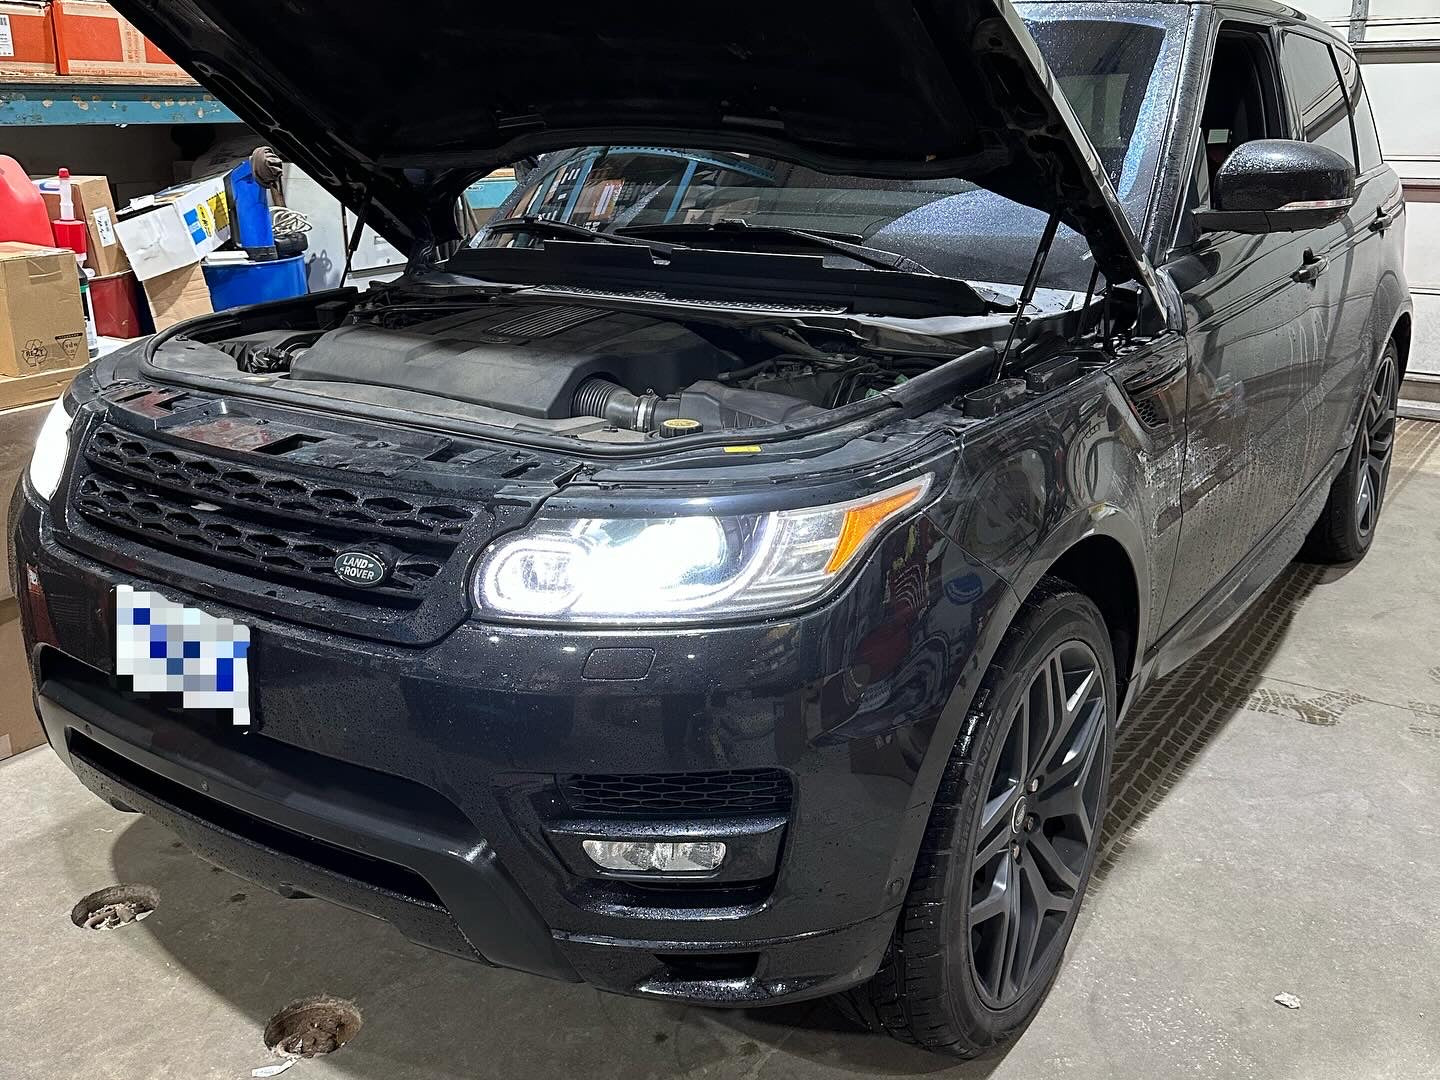 Range rover 5.0L V8 Supercharged 2017+ ECU Tune Stage 1 - 3 - 0